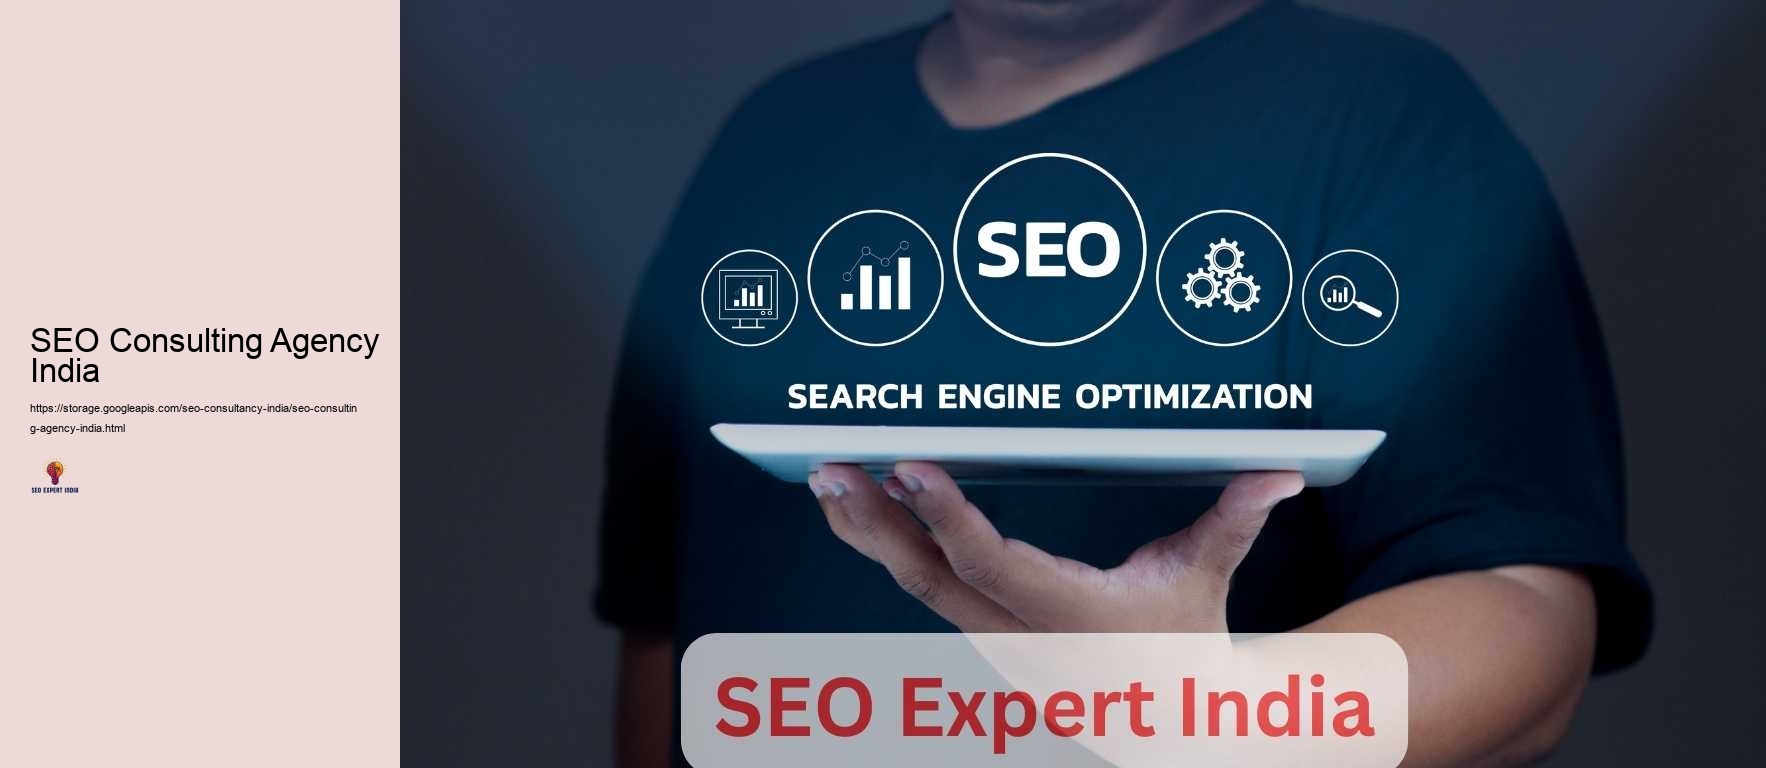 SEO Consulting Agency India